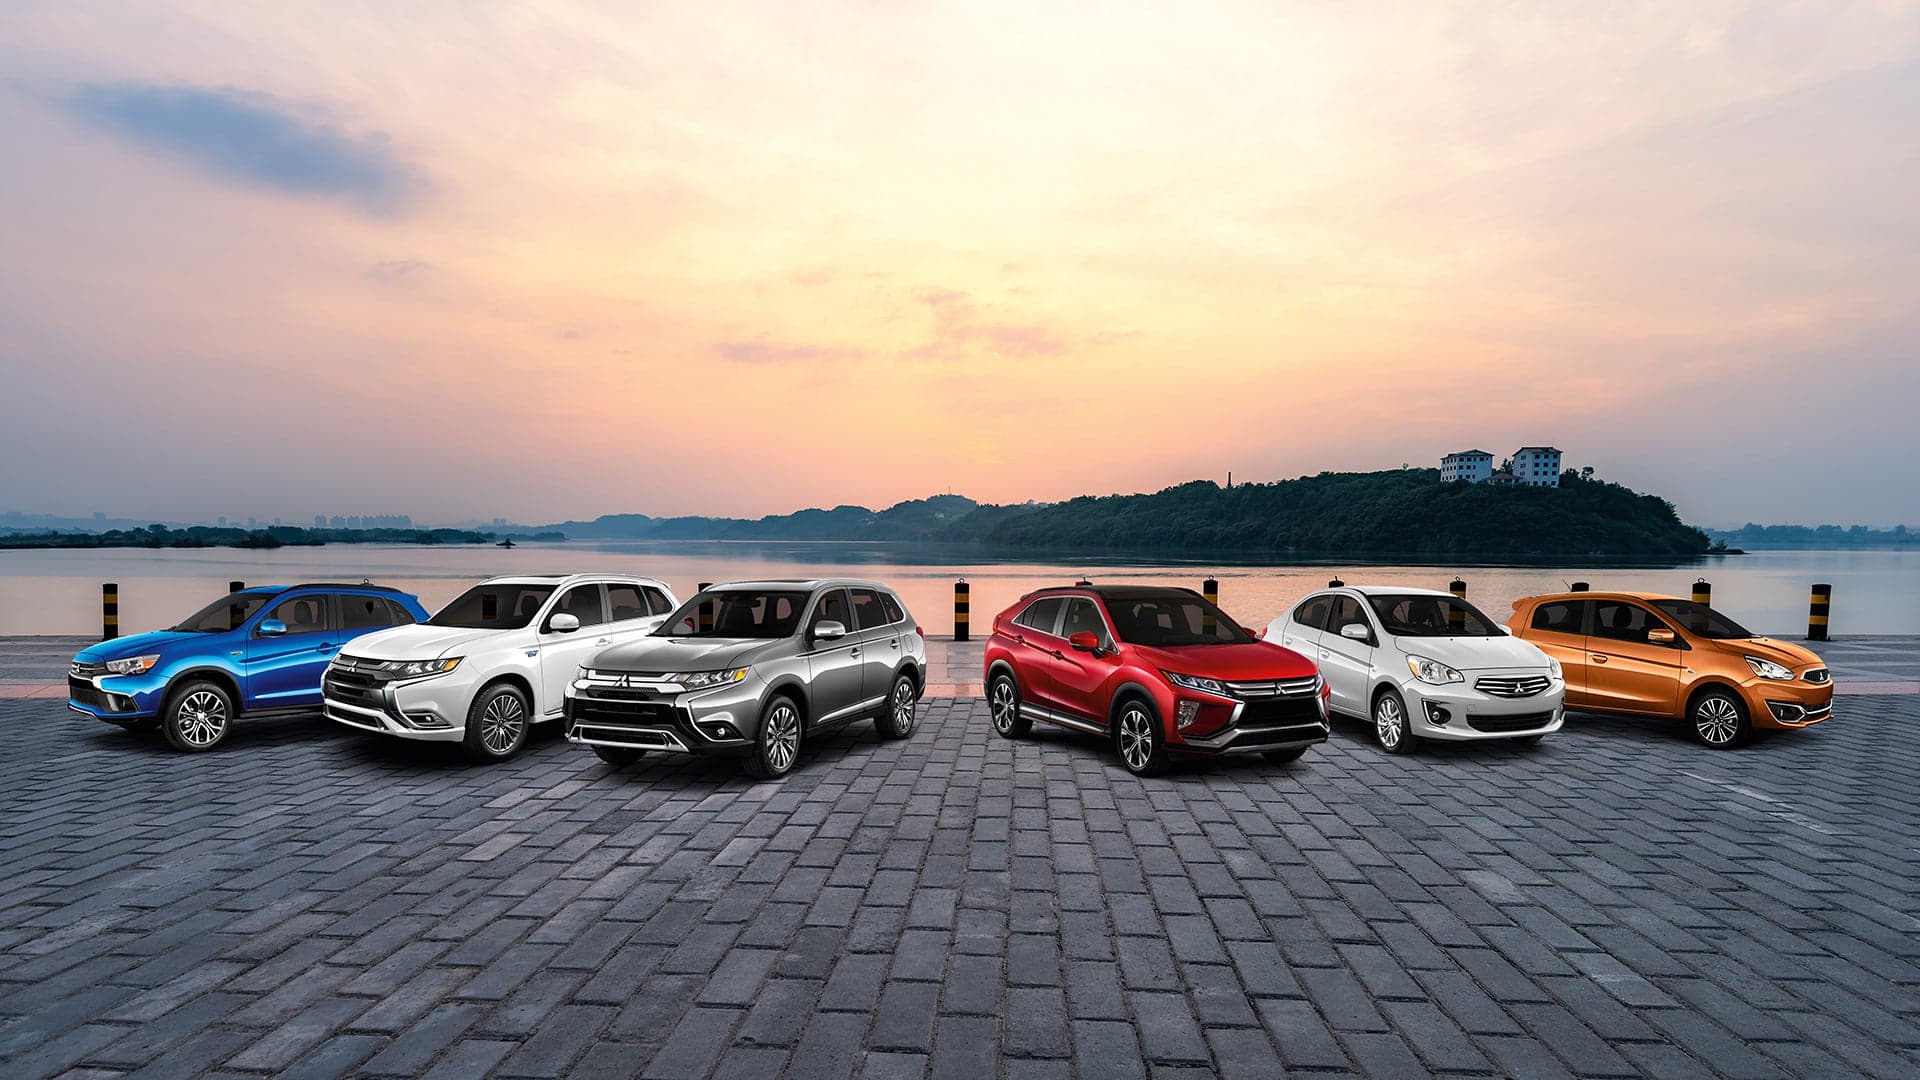 Did You Know Mitsubishi Outsold Volvo, Land Rover, and Mini in the US in 2018?